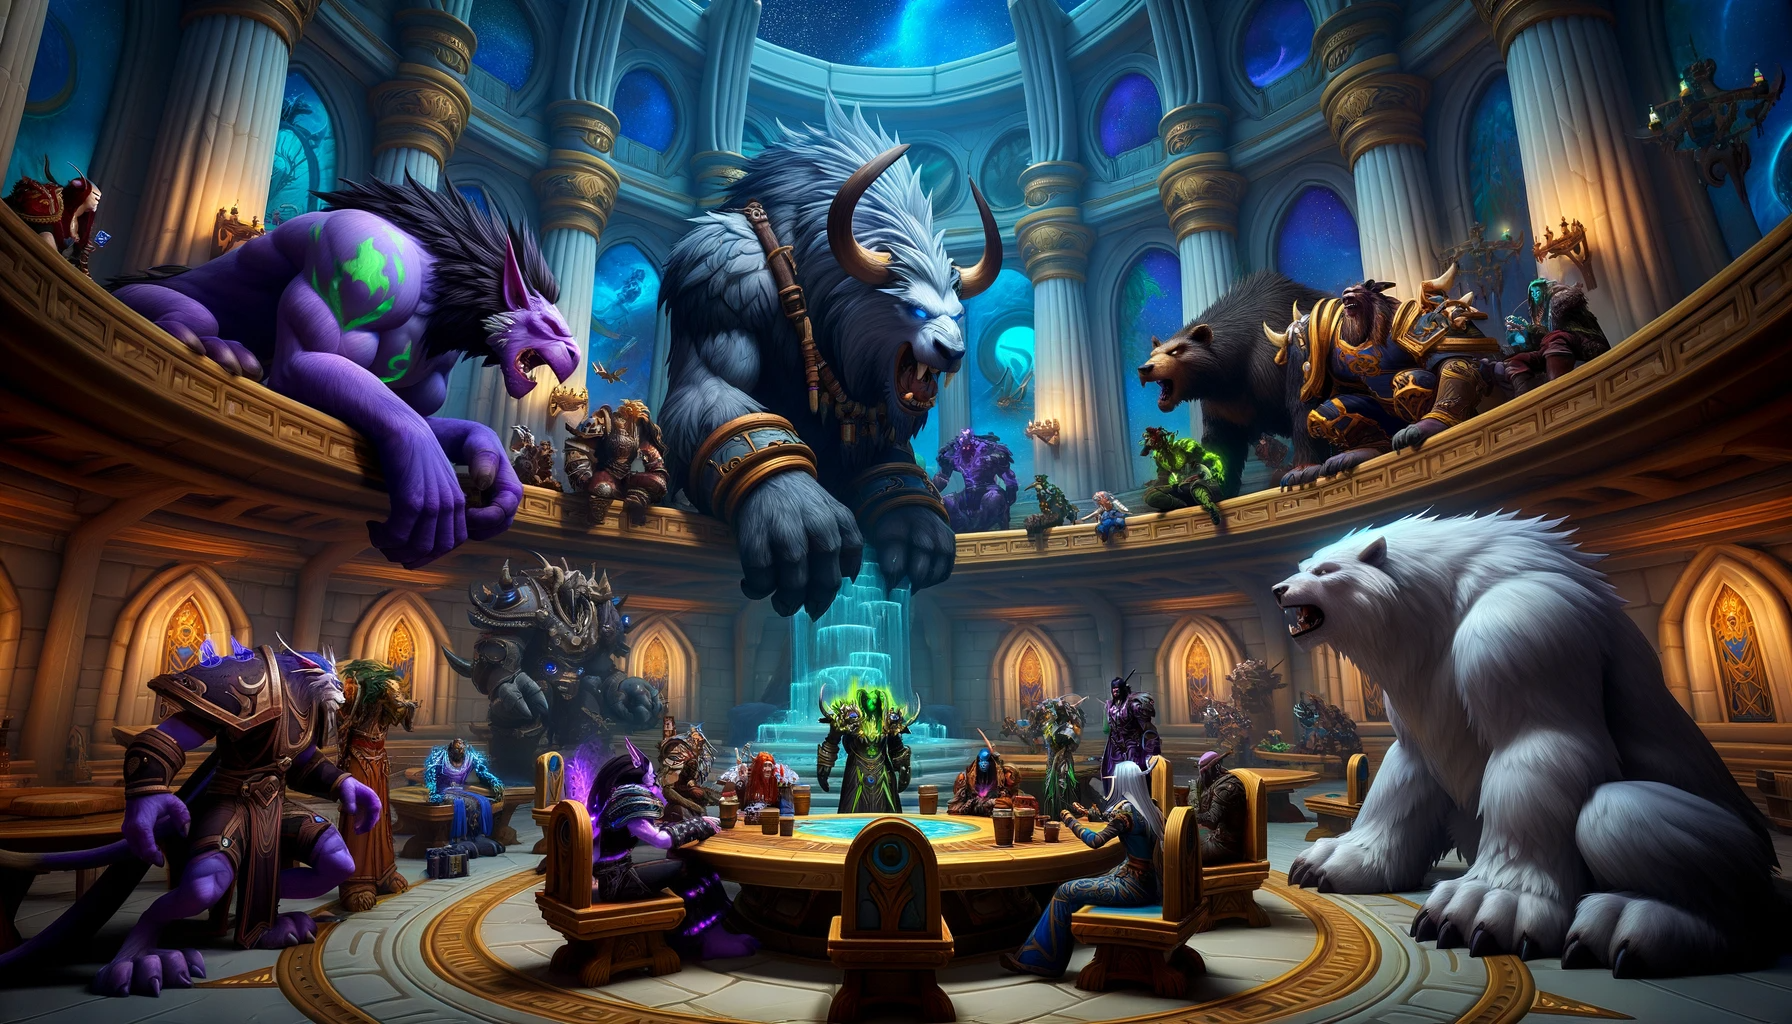 The guild hall of the Avengers of Teldrassil with various members engaged in conversations.